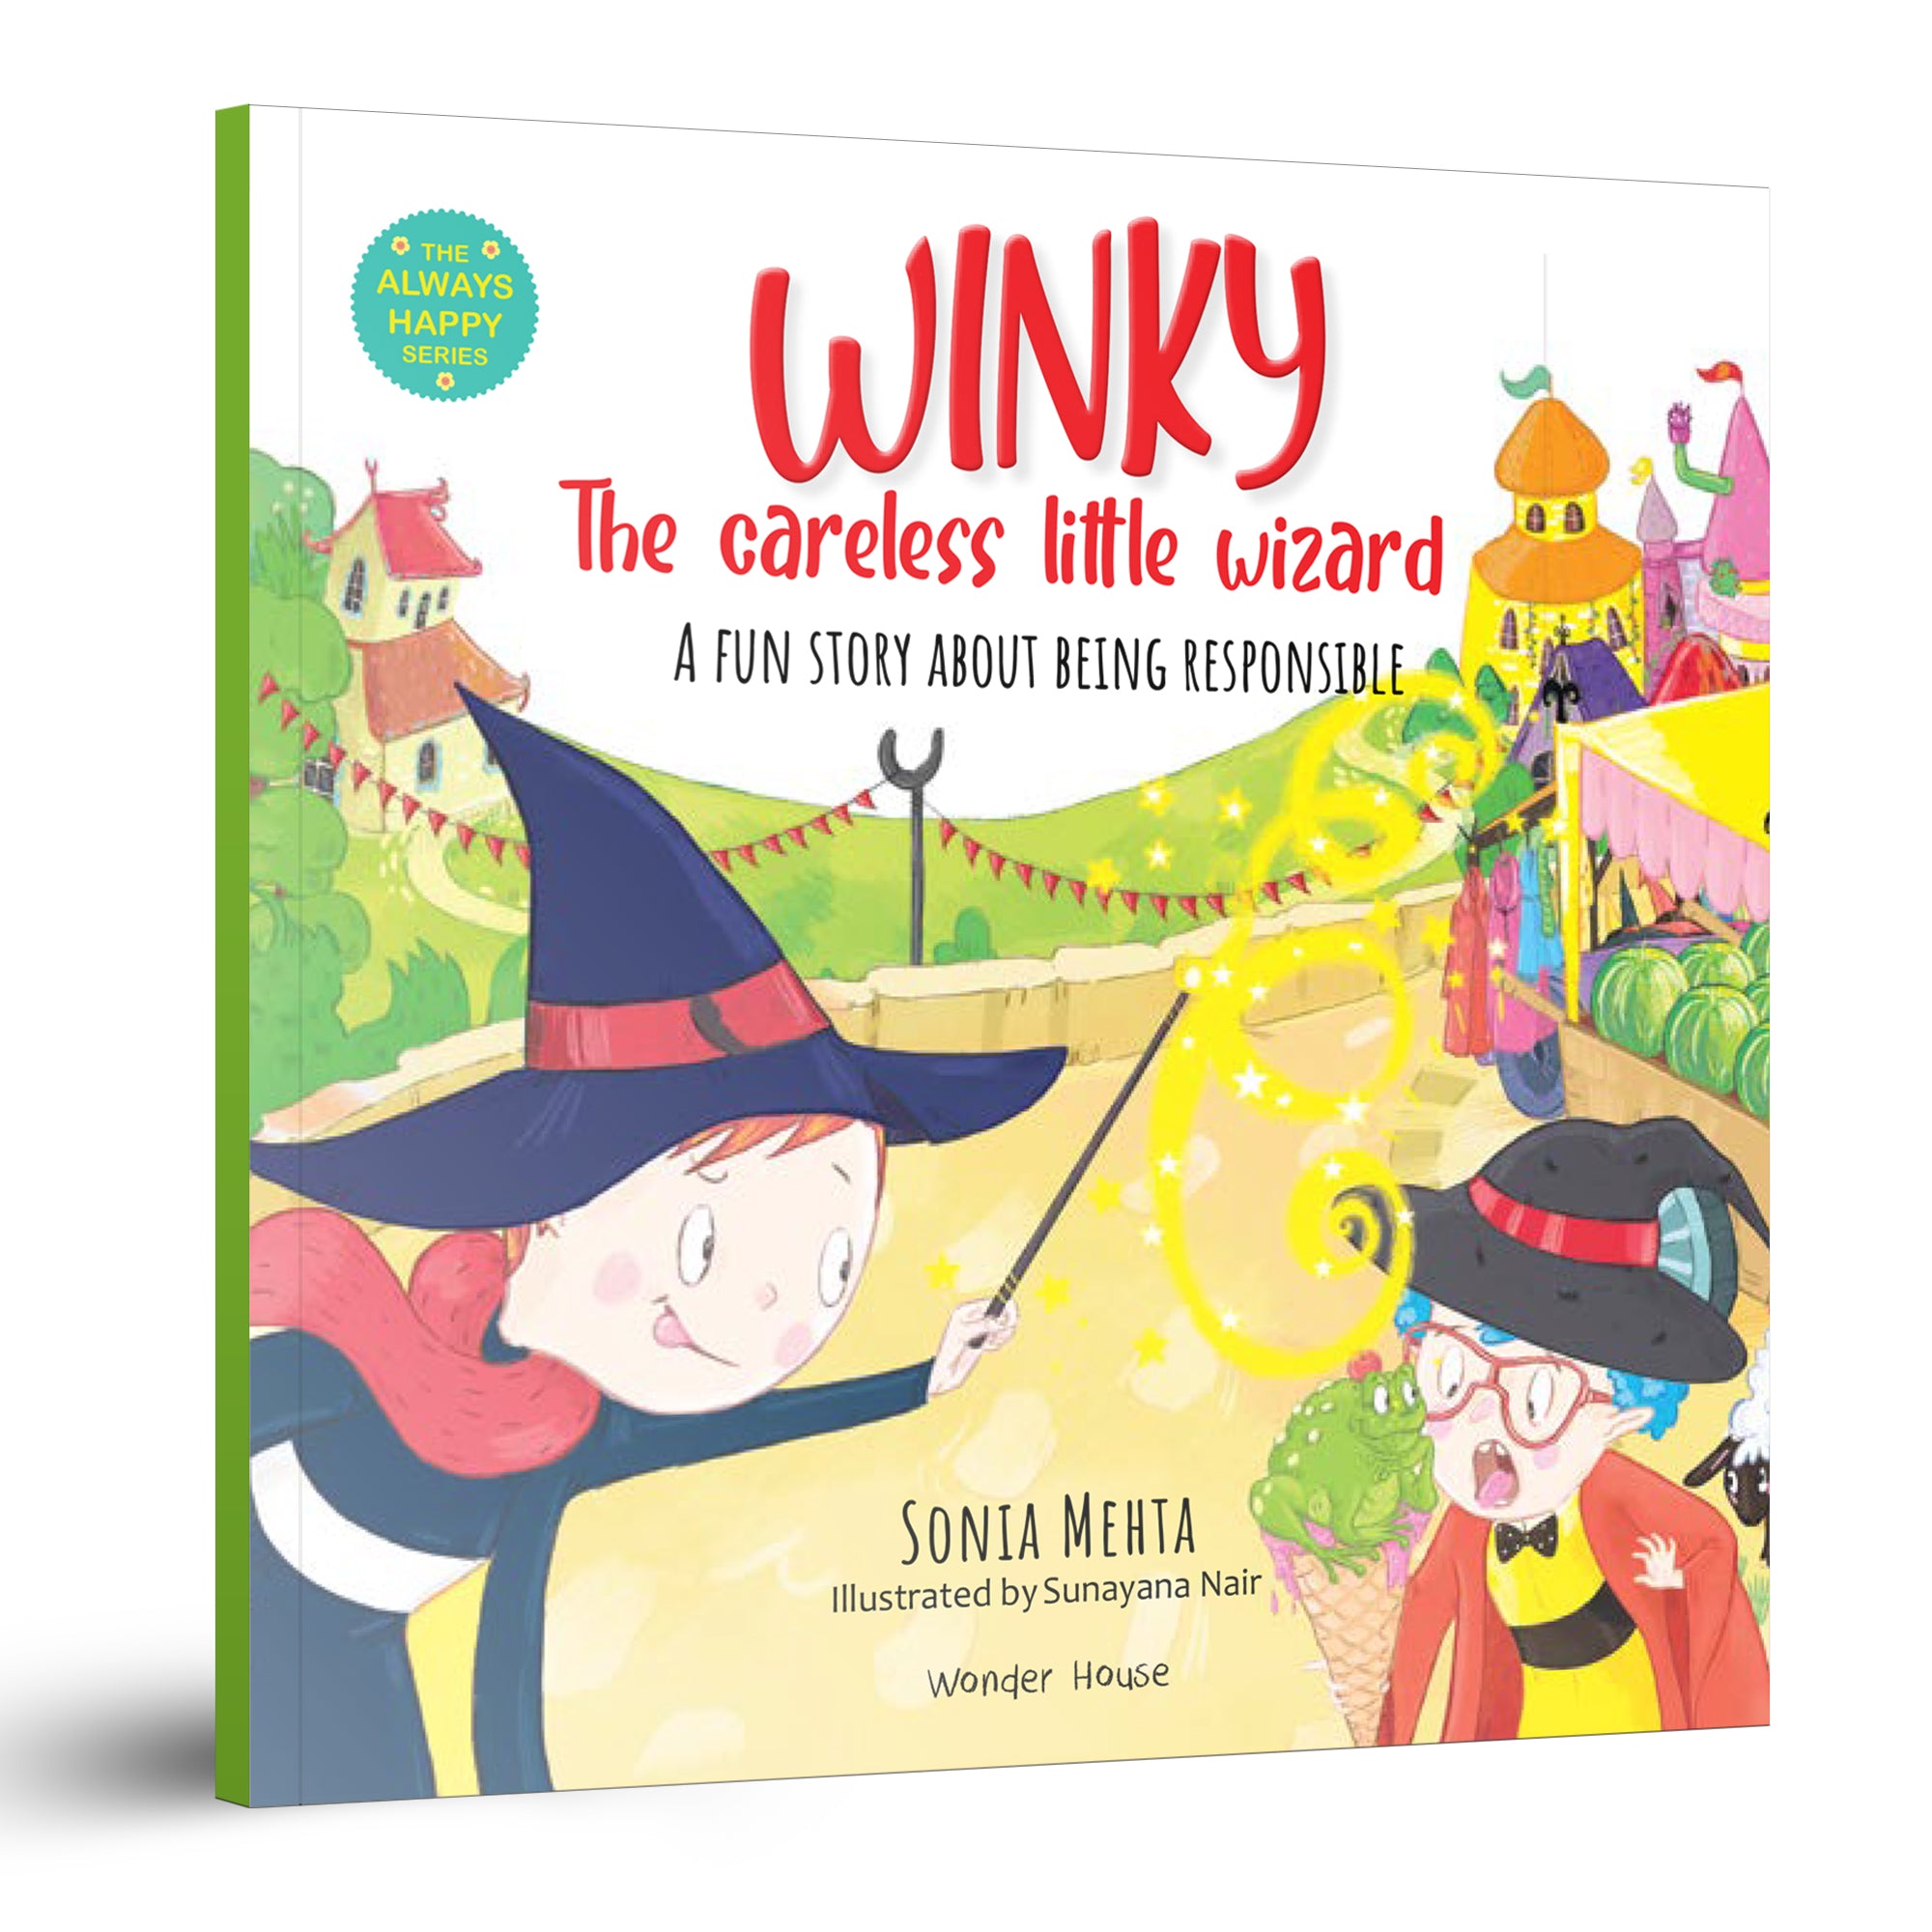 The Always Happy Series: Winky The Careless Little Wizard - A fun Story About Being Responsible - Beautifully Illustrated Picture Book For Children